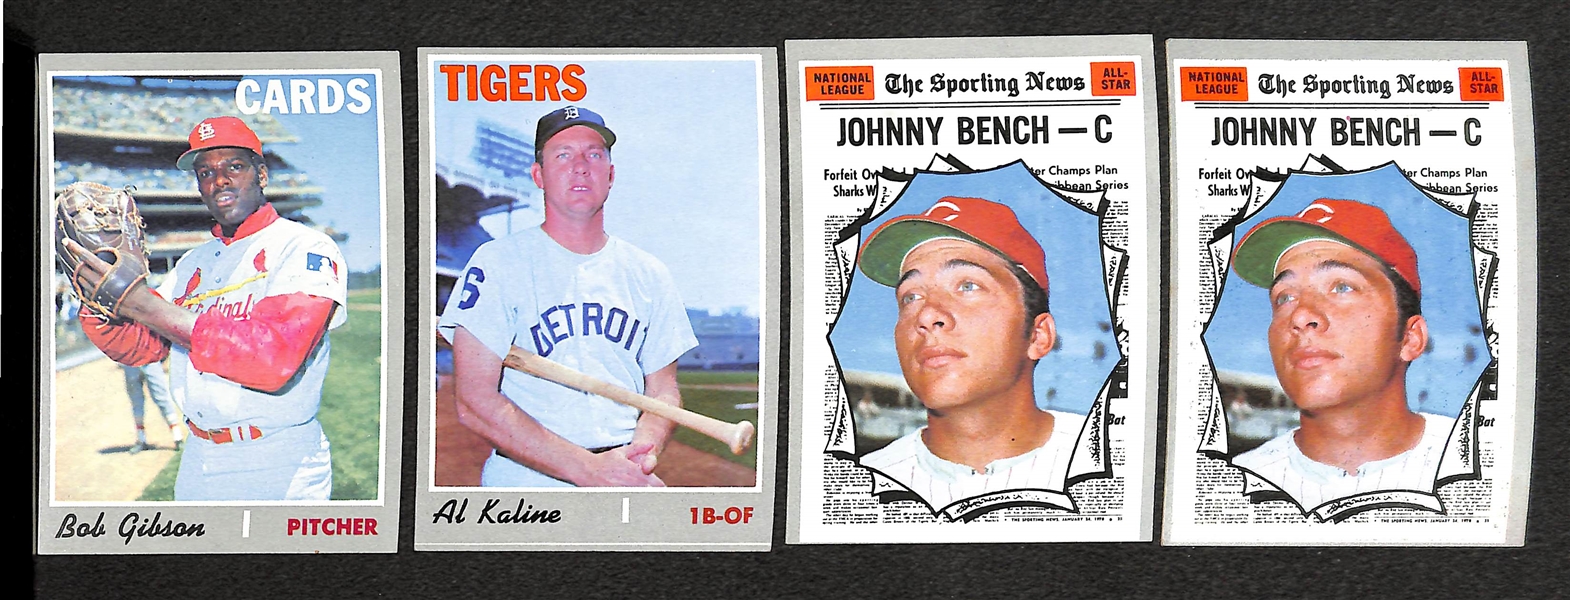 HUGE 1970 Topps High-Grade Baseball Card Lot - Over 5,000 Cards!  Includes 600+ Assorted High Number Cards! Many Pack-Fresh Cards!